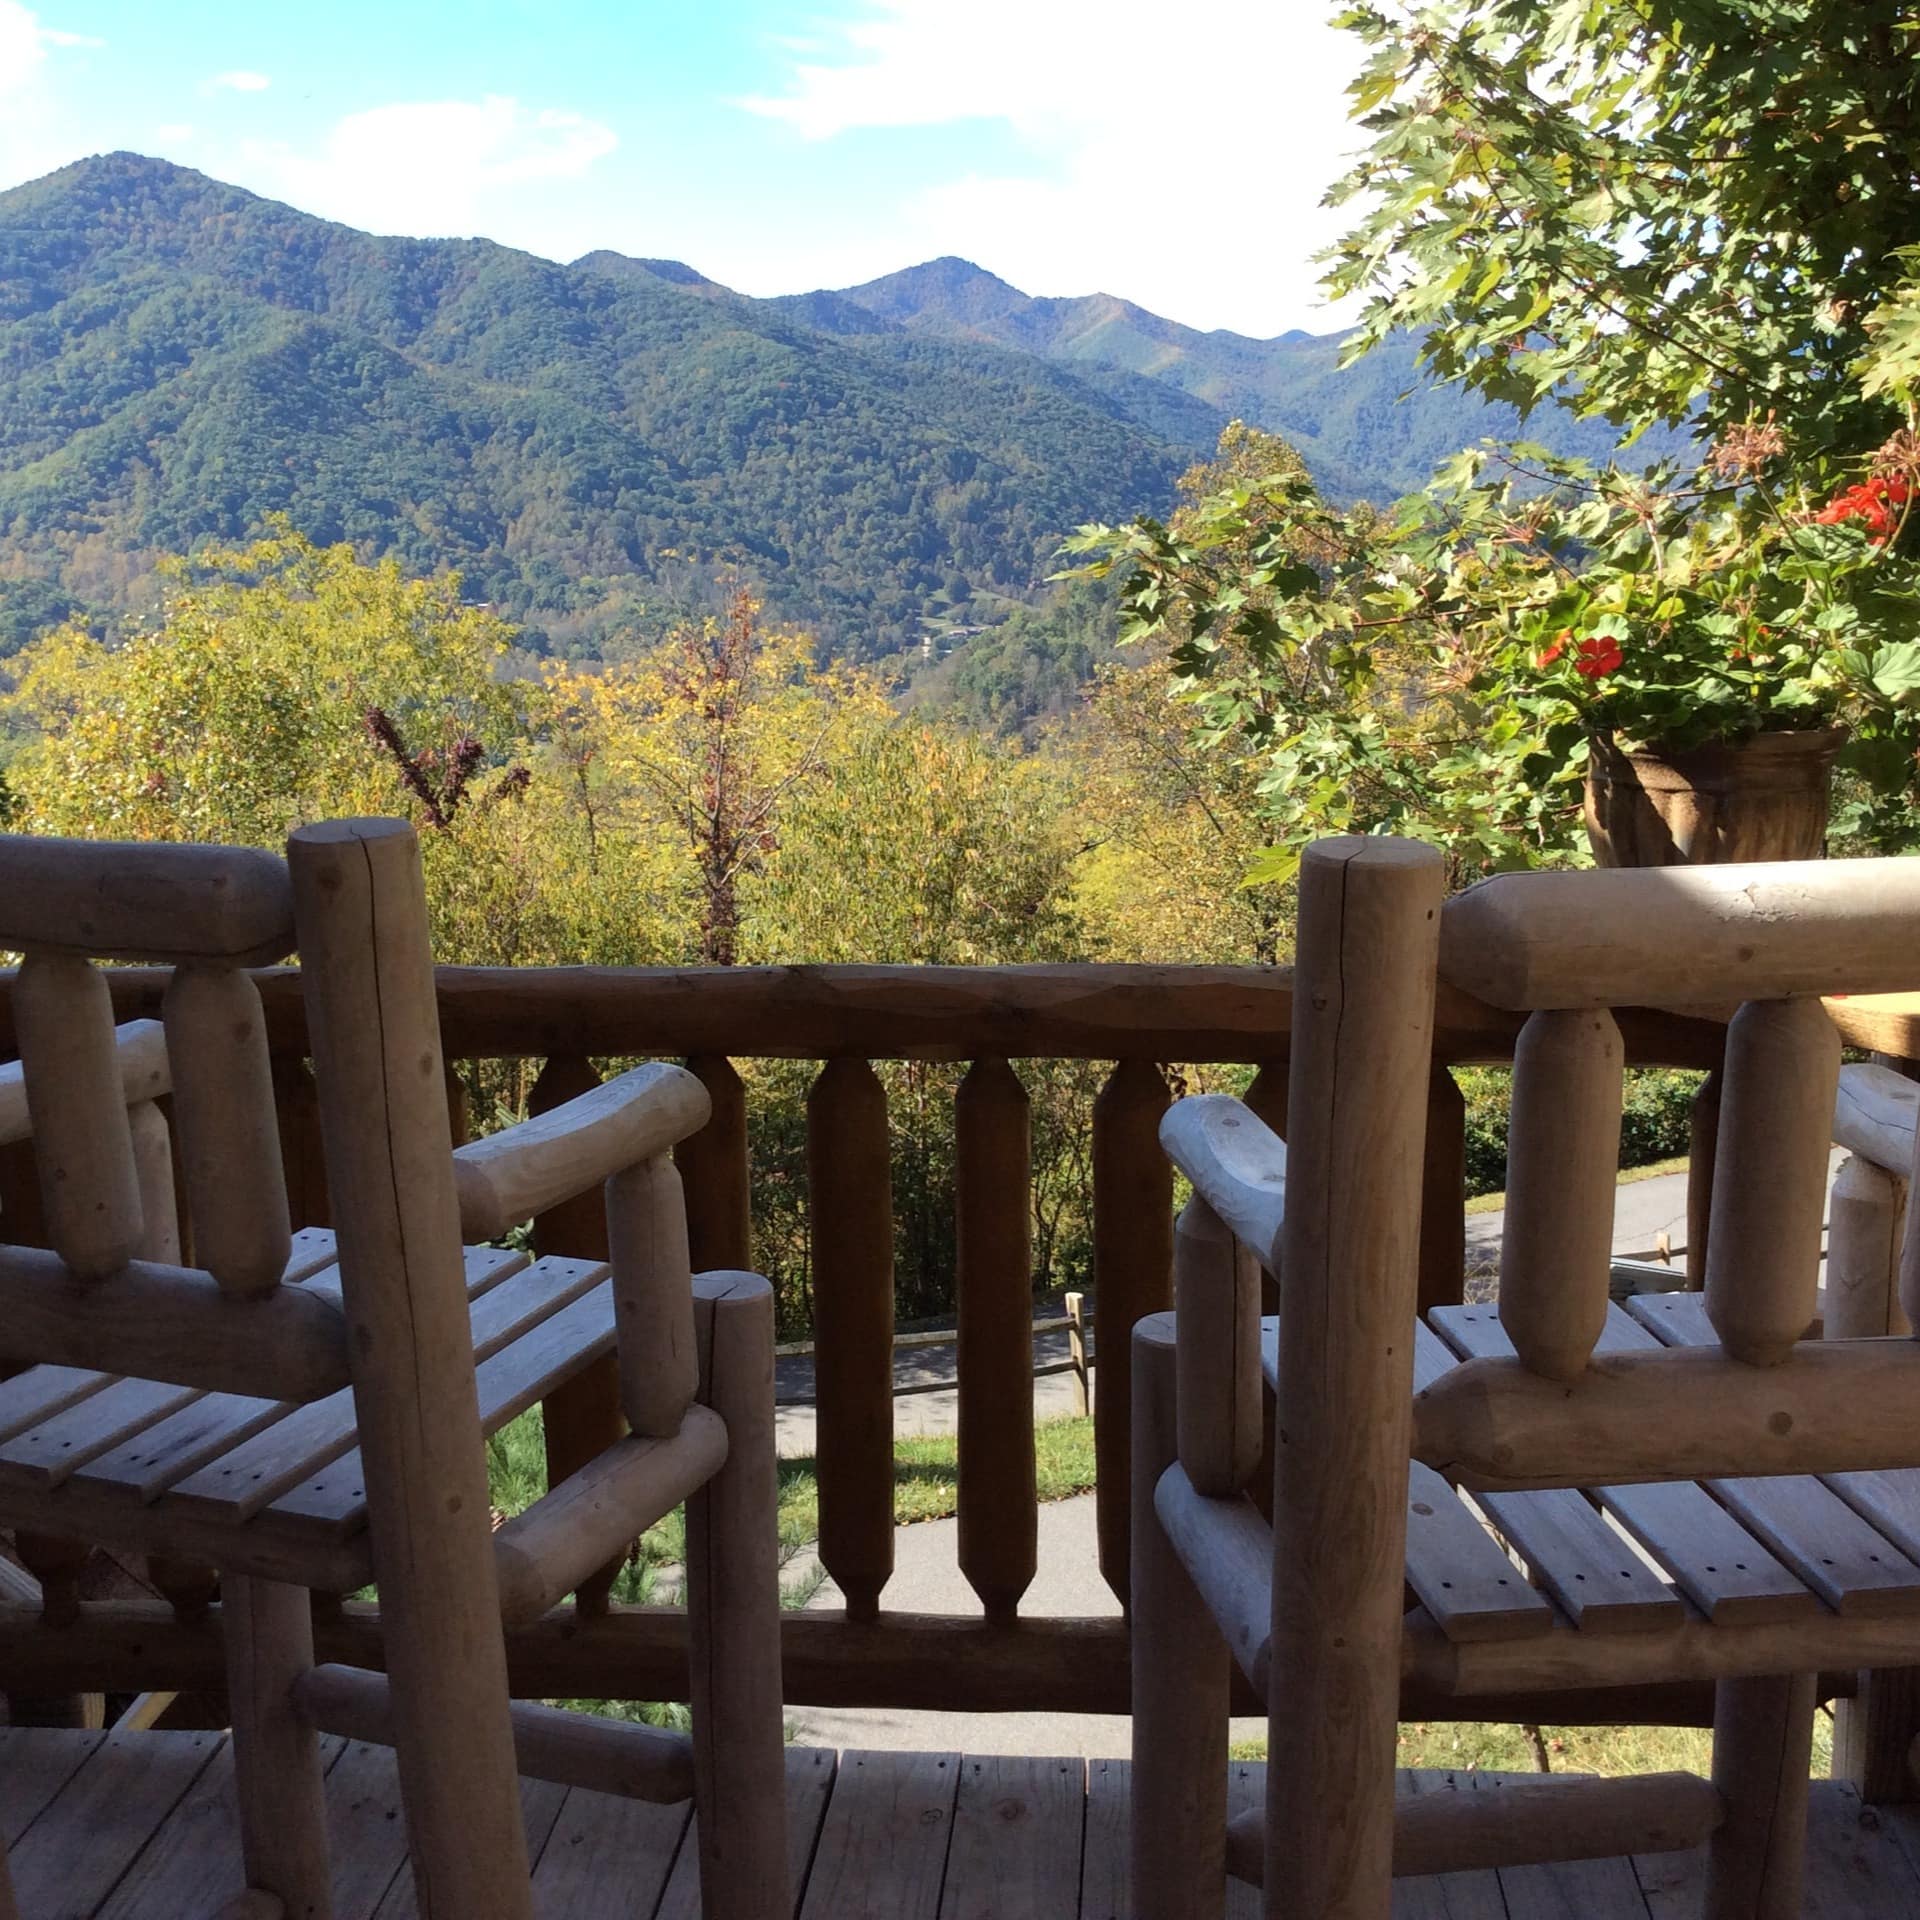 2 chairs on a cabin porch overlooking the mountains